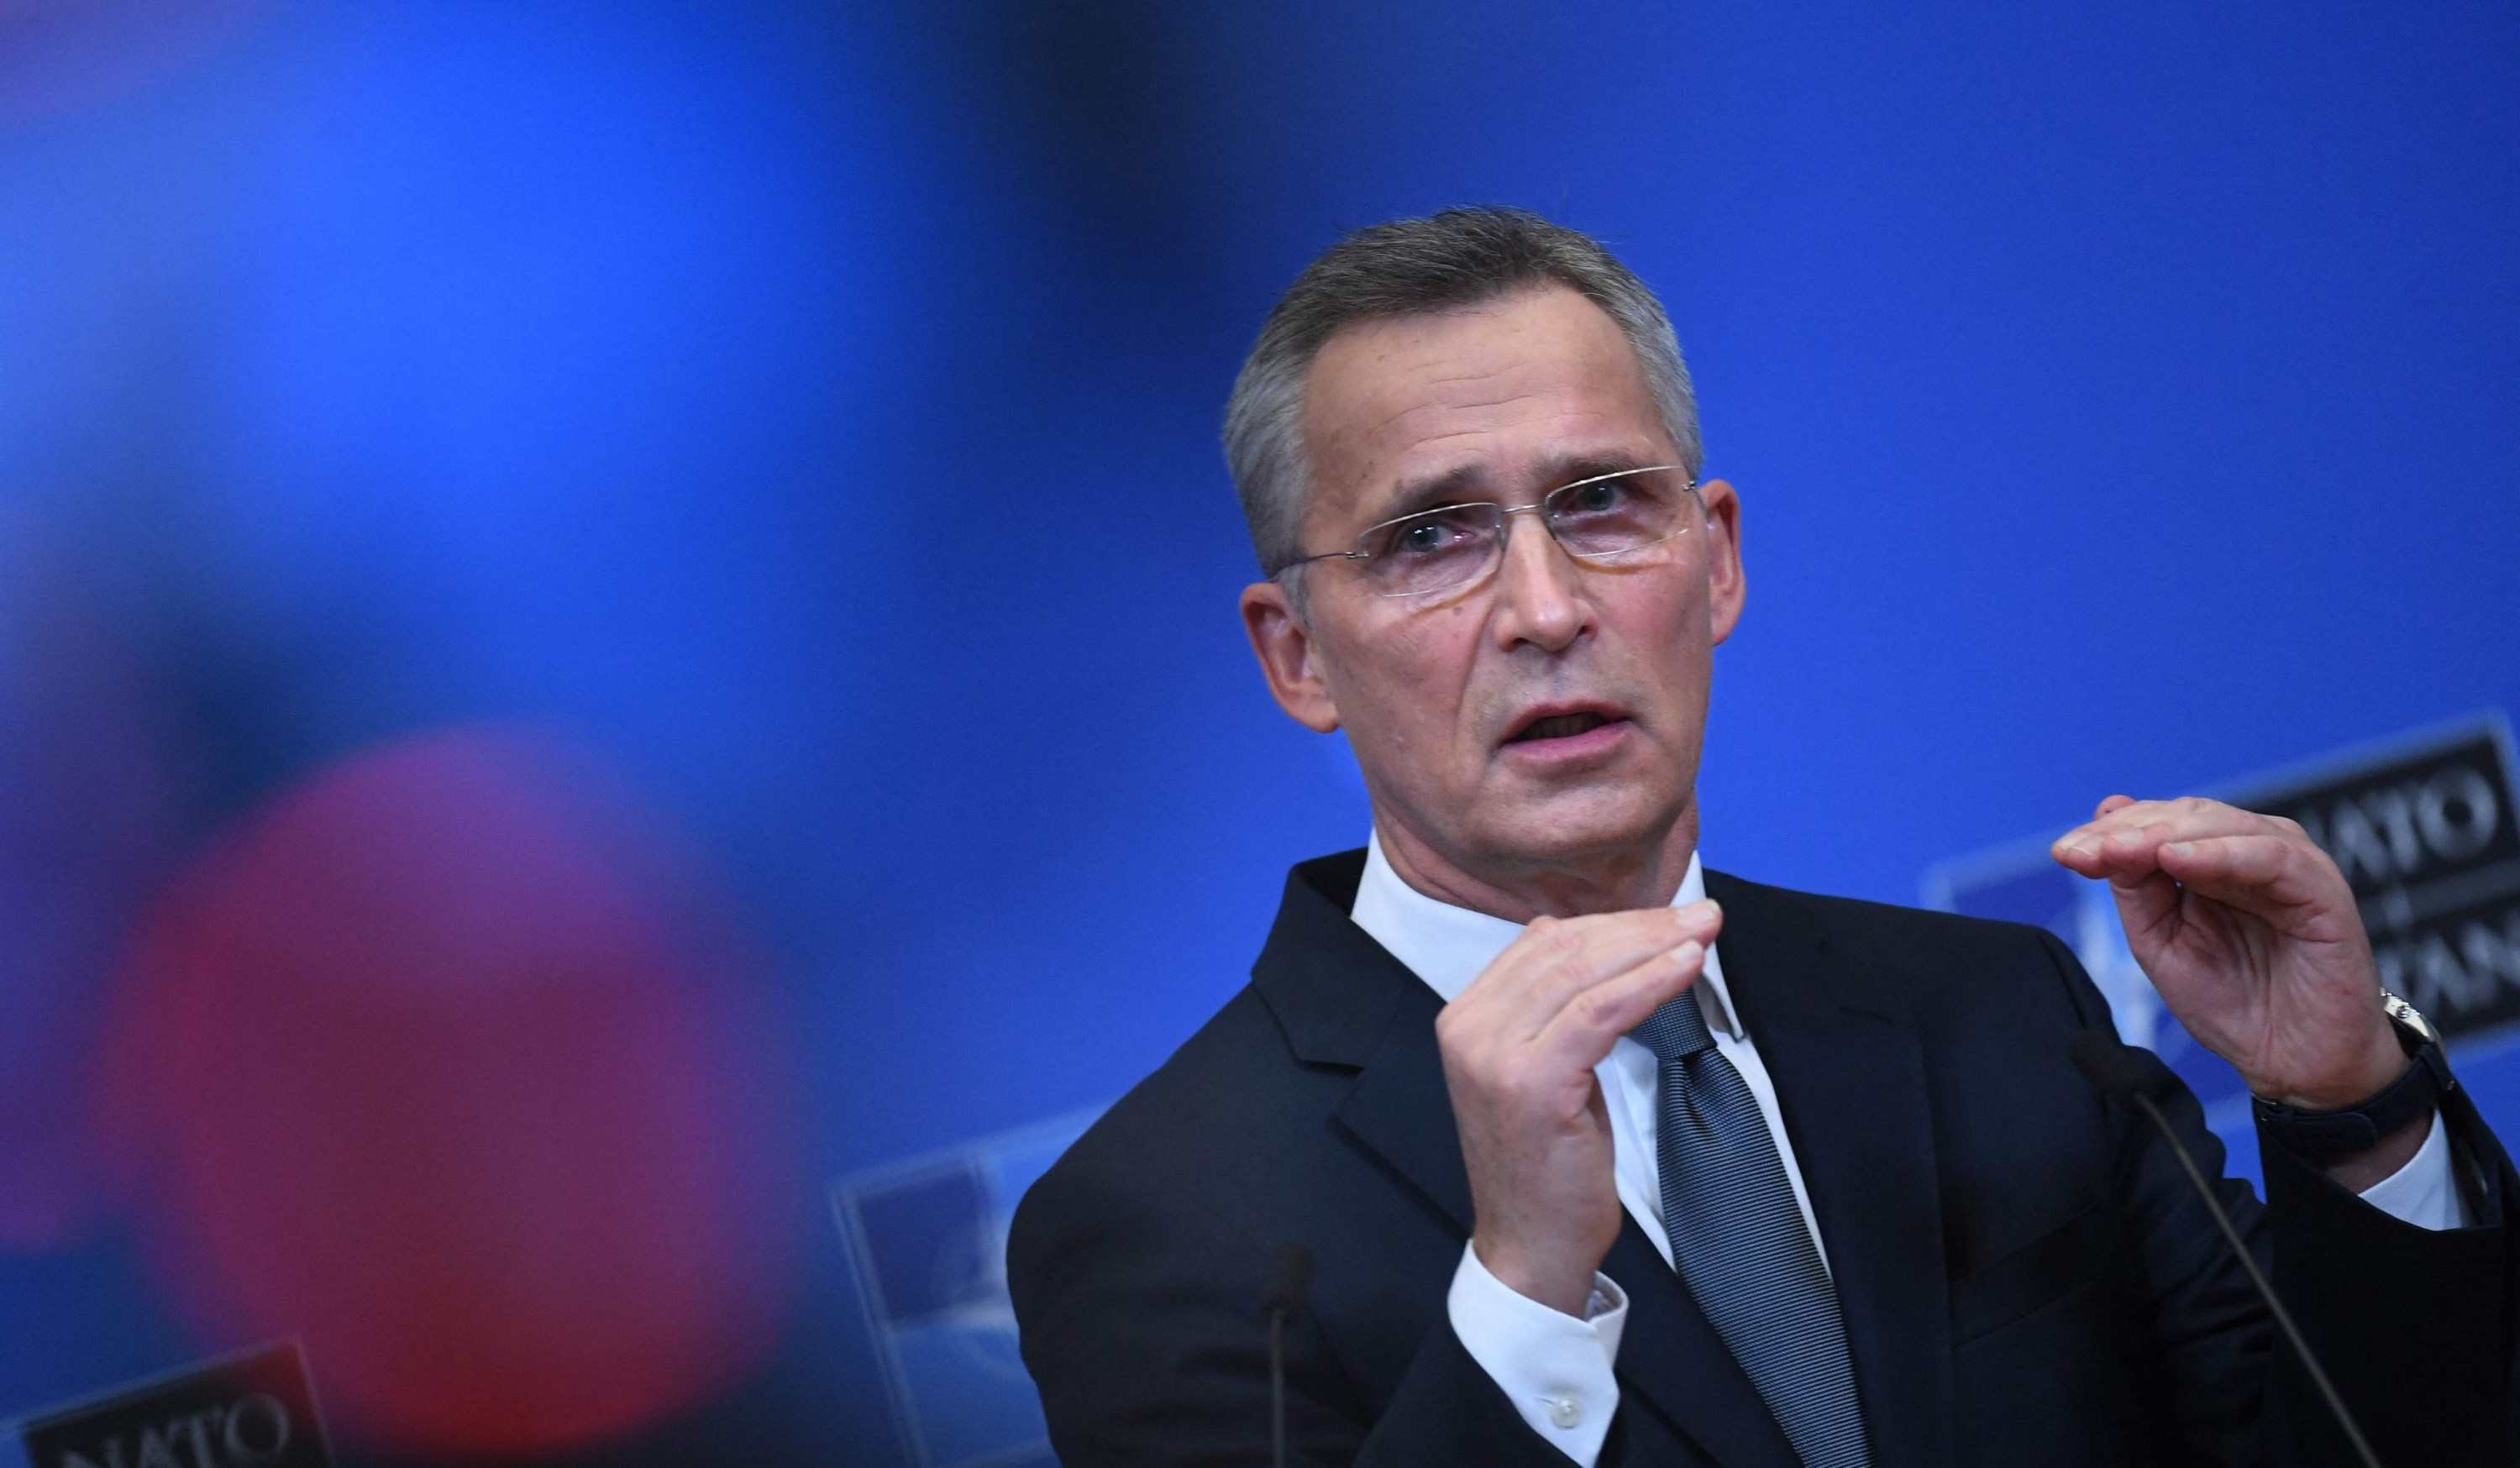 We have to prevent conflict in Ukraine from turning into a full-fledged war between Russia and NATO, Stoltenberg